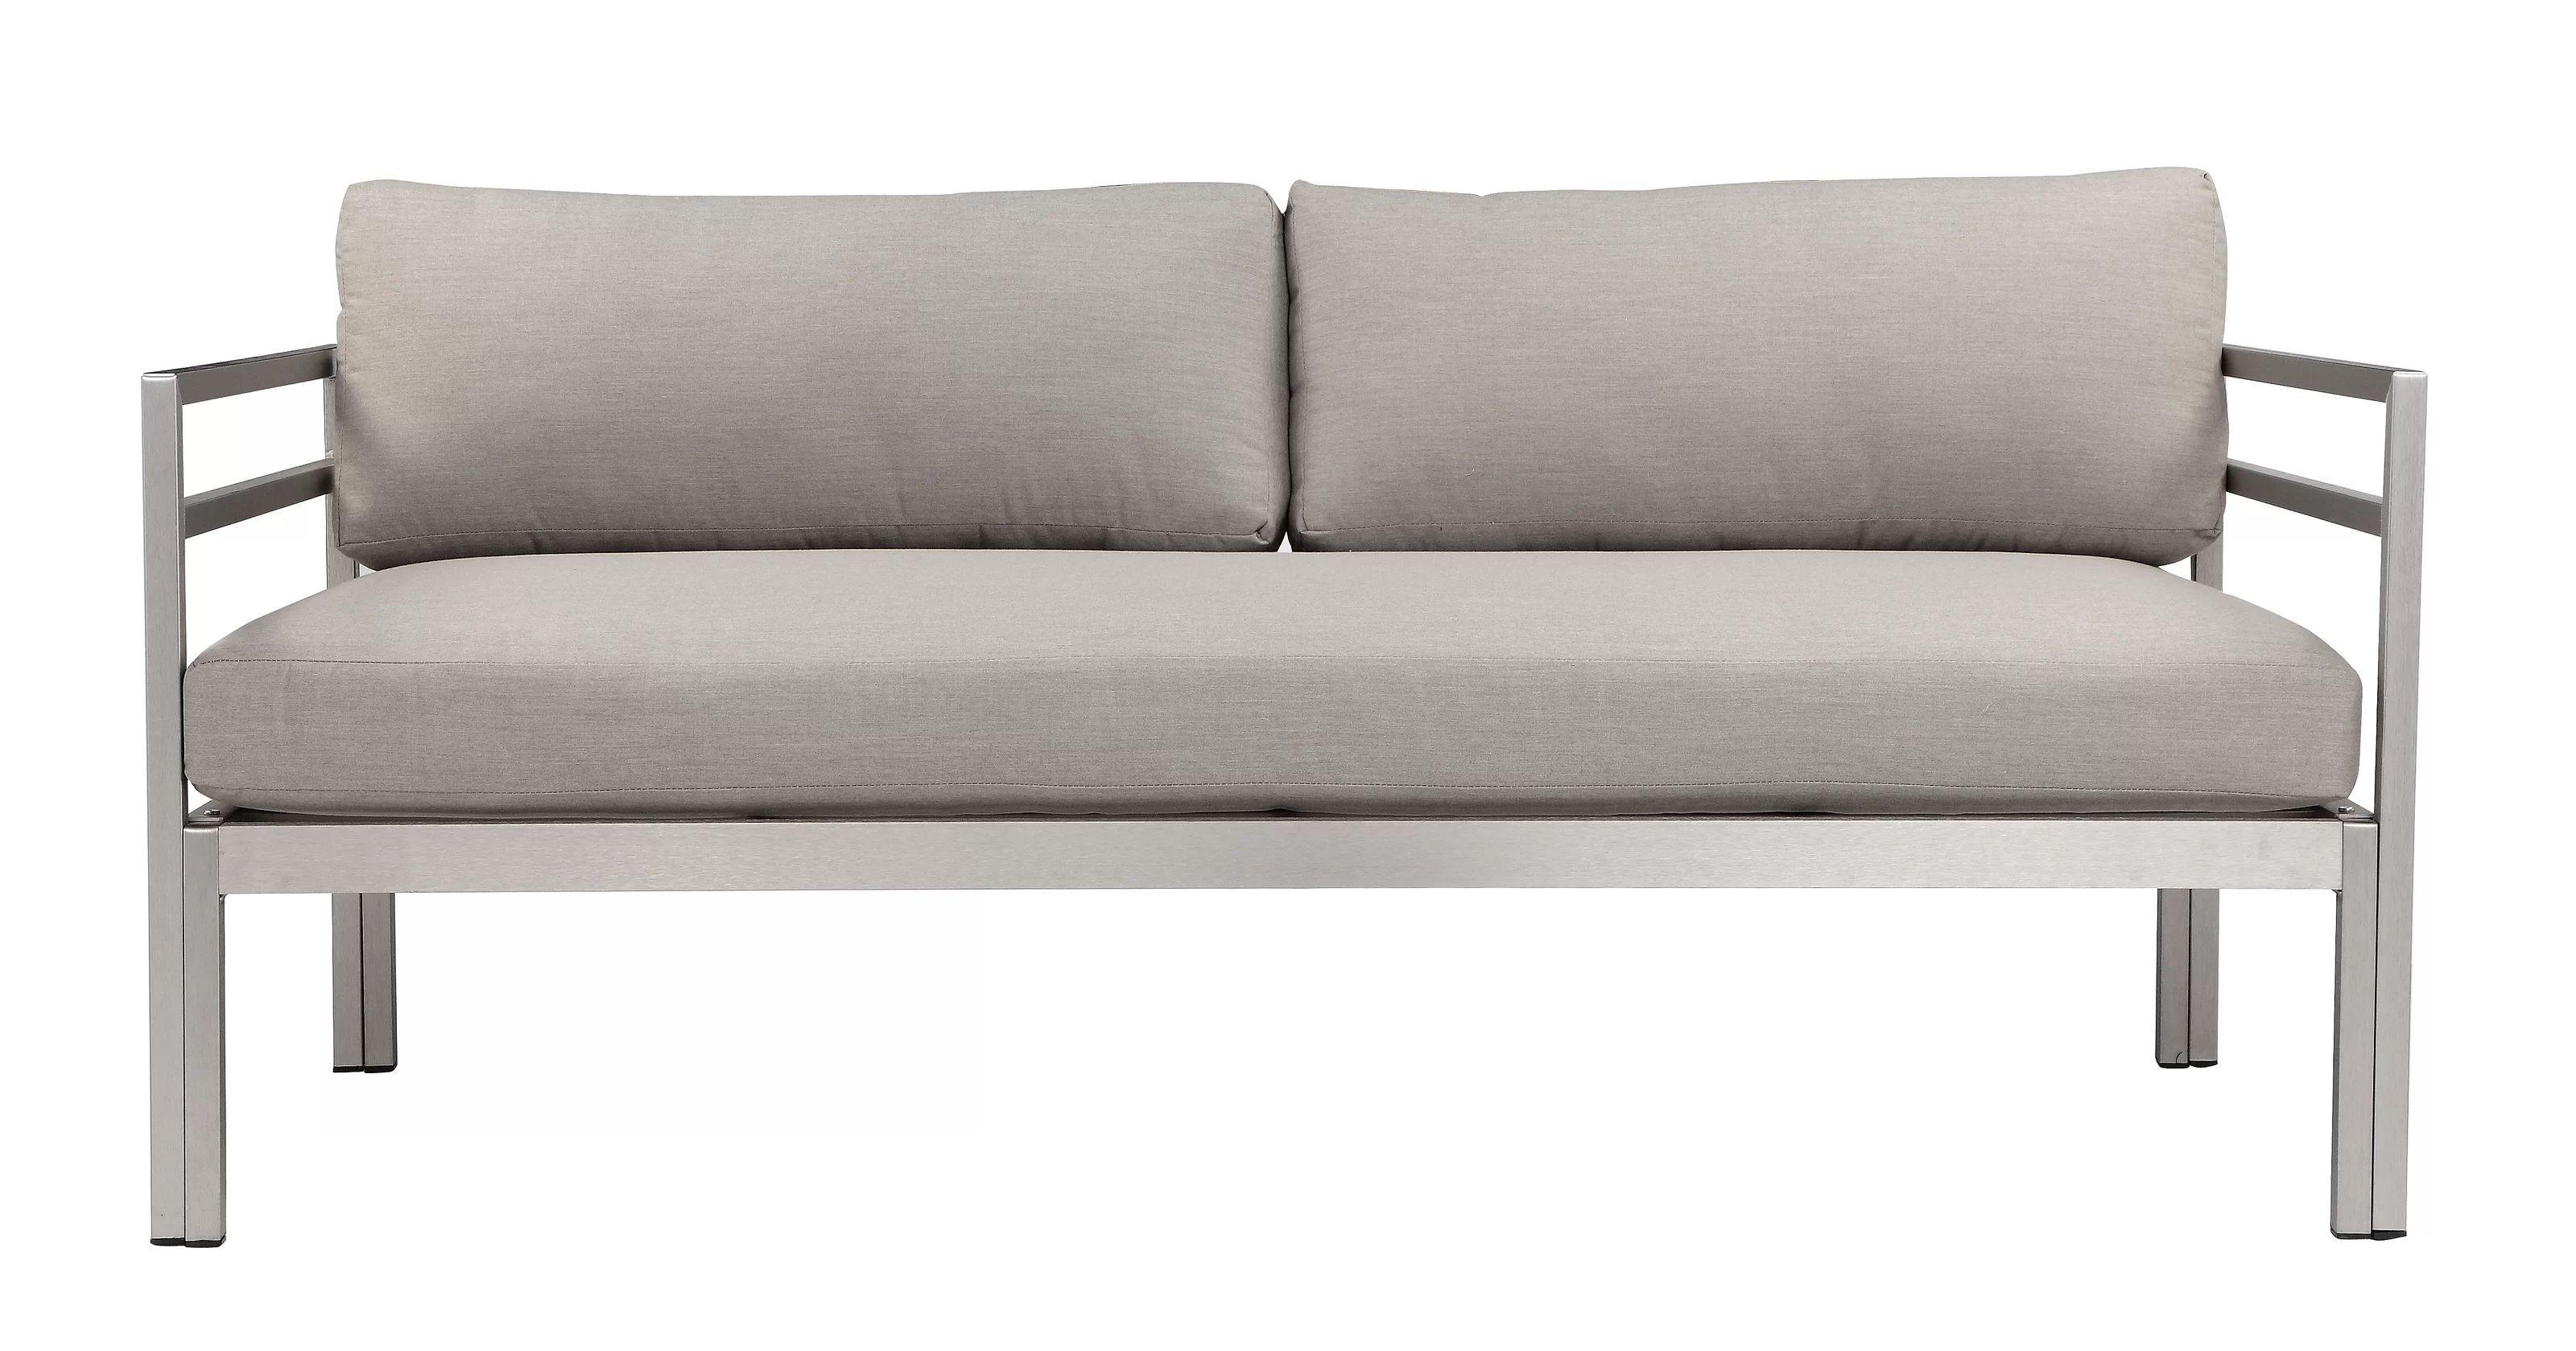 Atwell Loveseat with Cushions | Wayfair North America